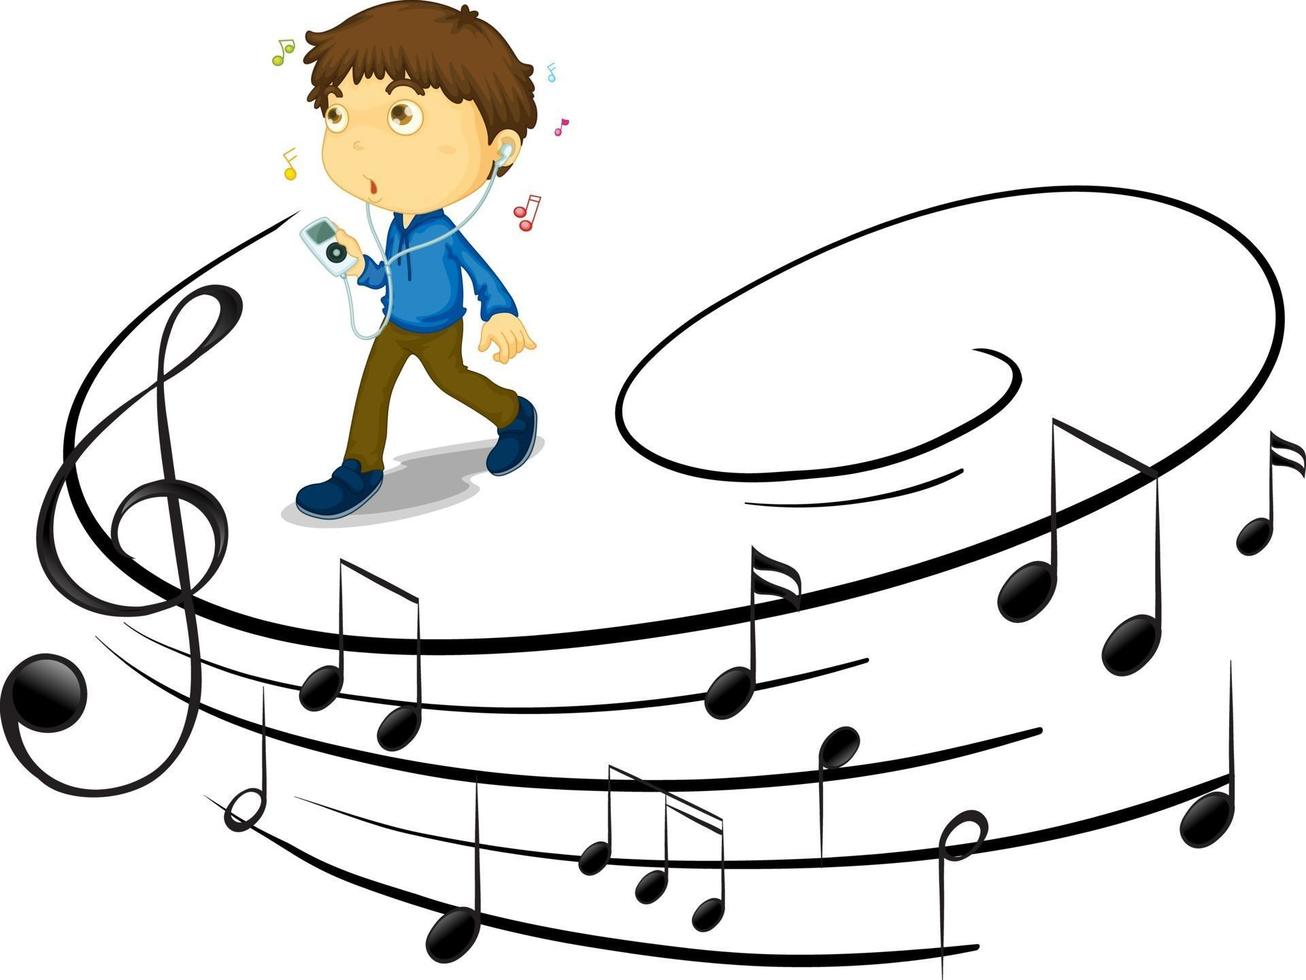 Doodle cartoon character of a young man listening music with musical melody symbols vector